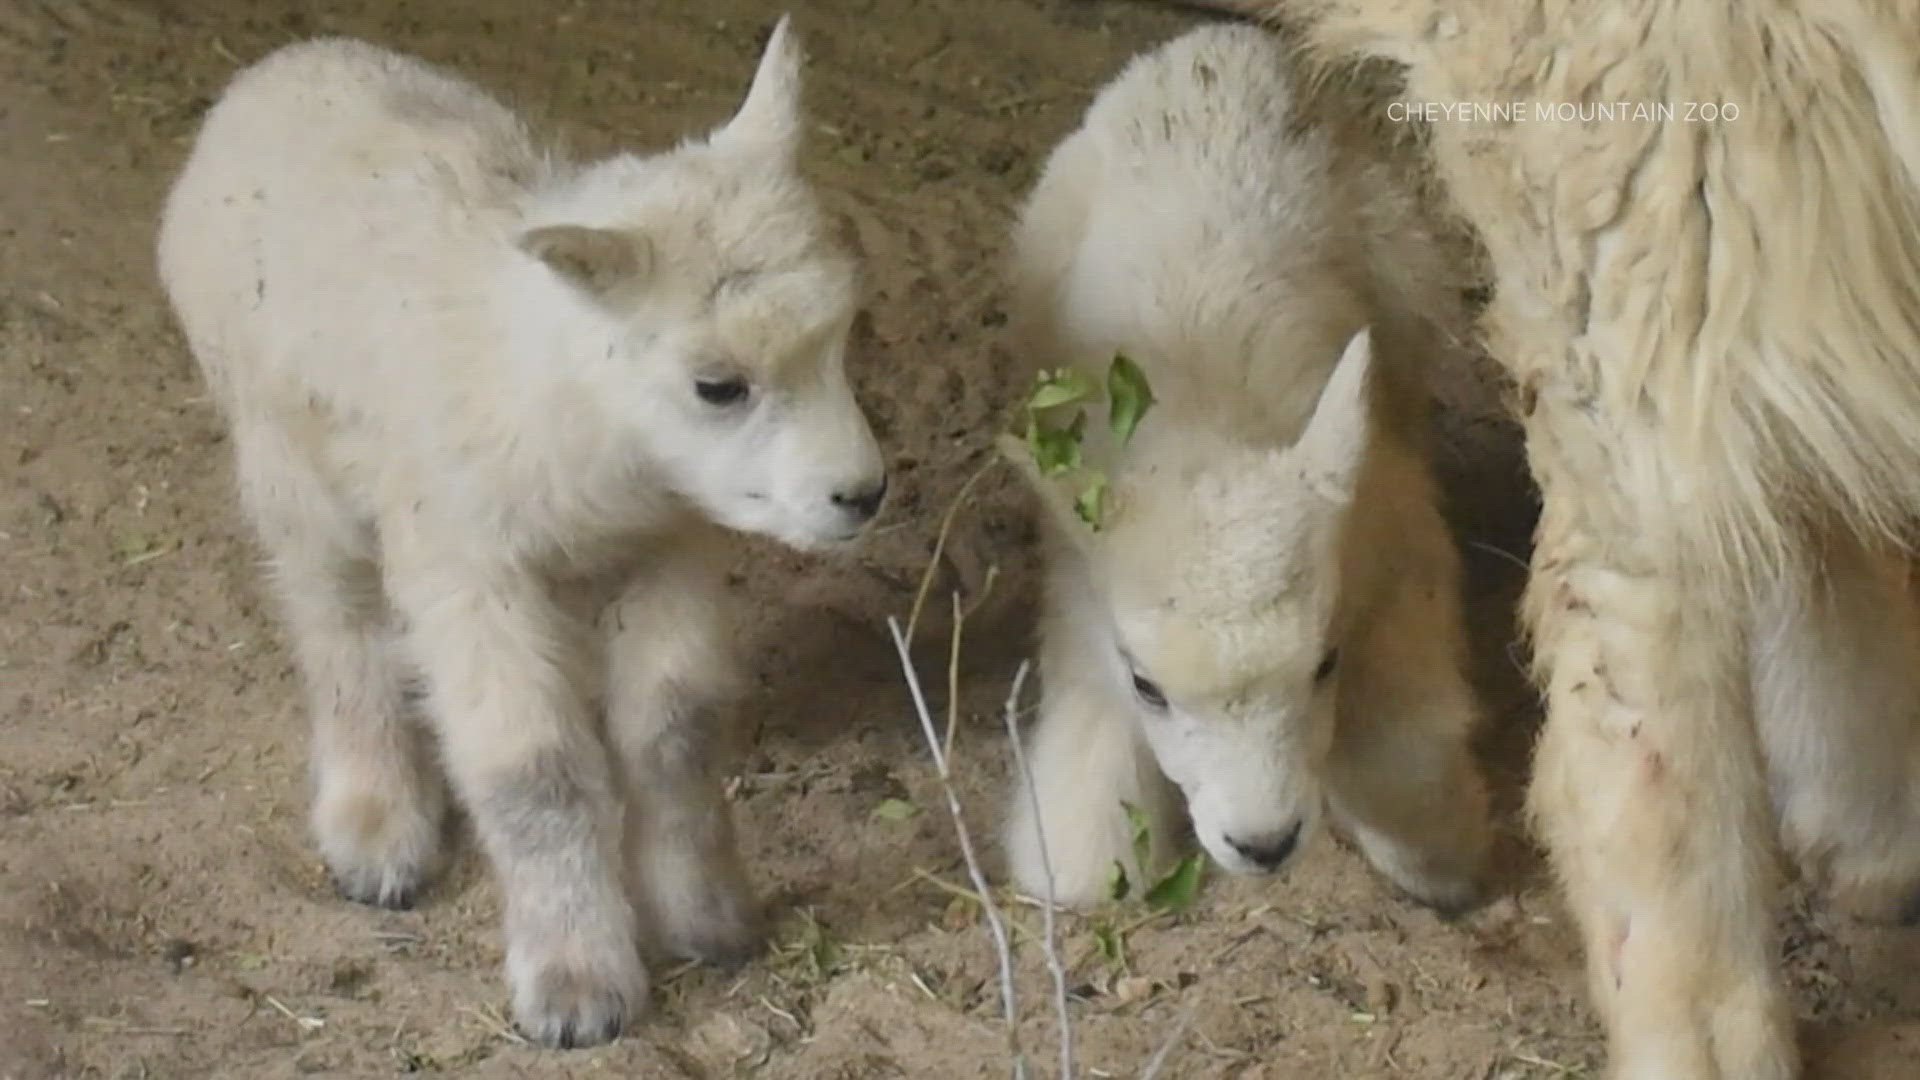 The Cheyenne Mountain Zoo is showing off its newest additions: twin Rocky Mountain goats that were born on Sunday.